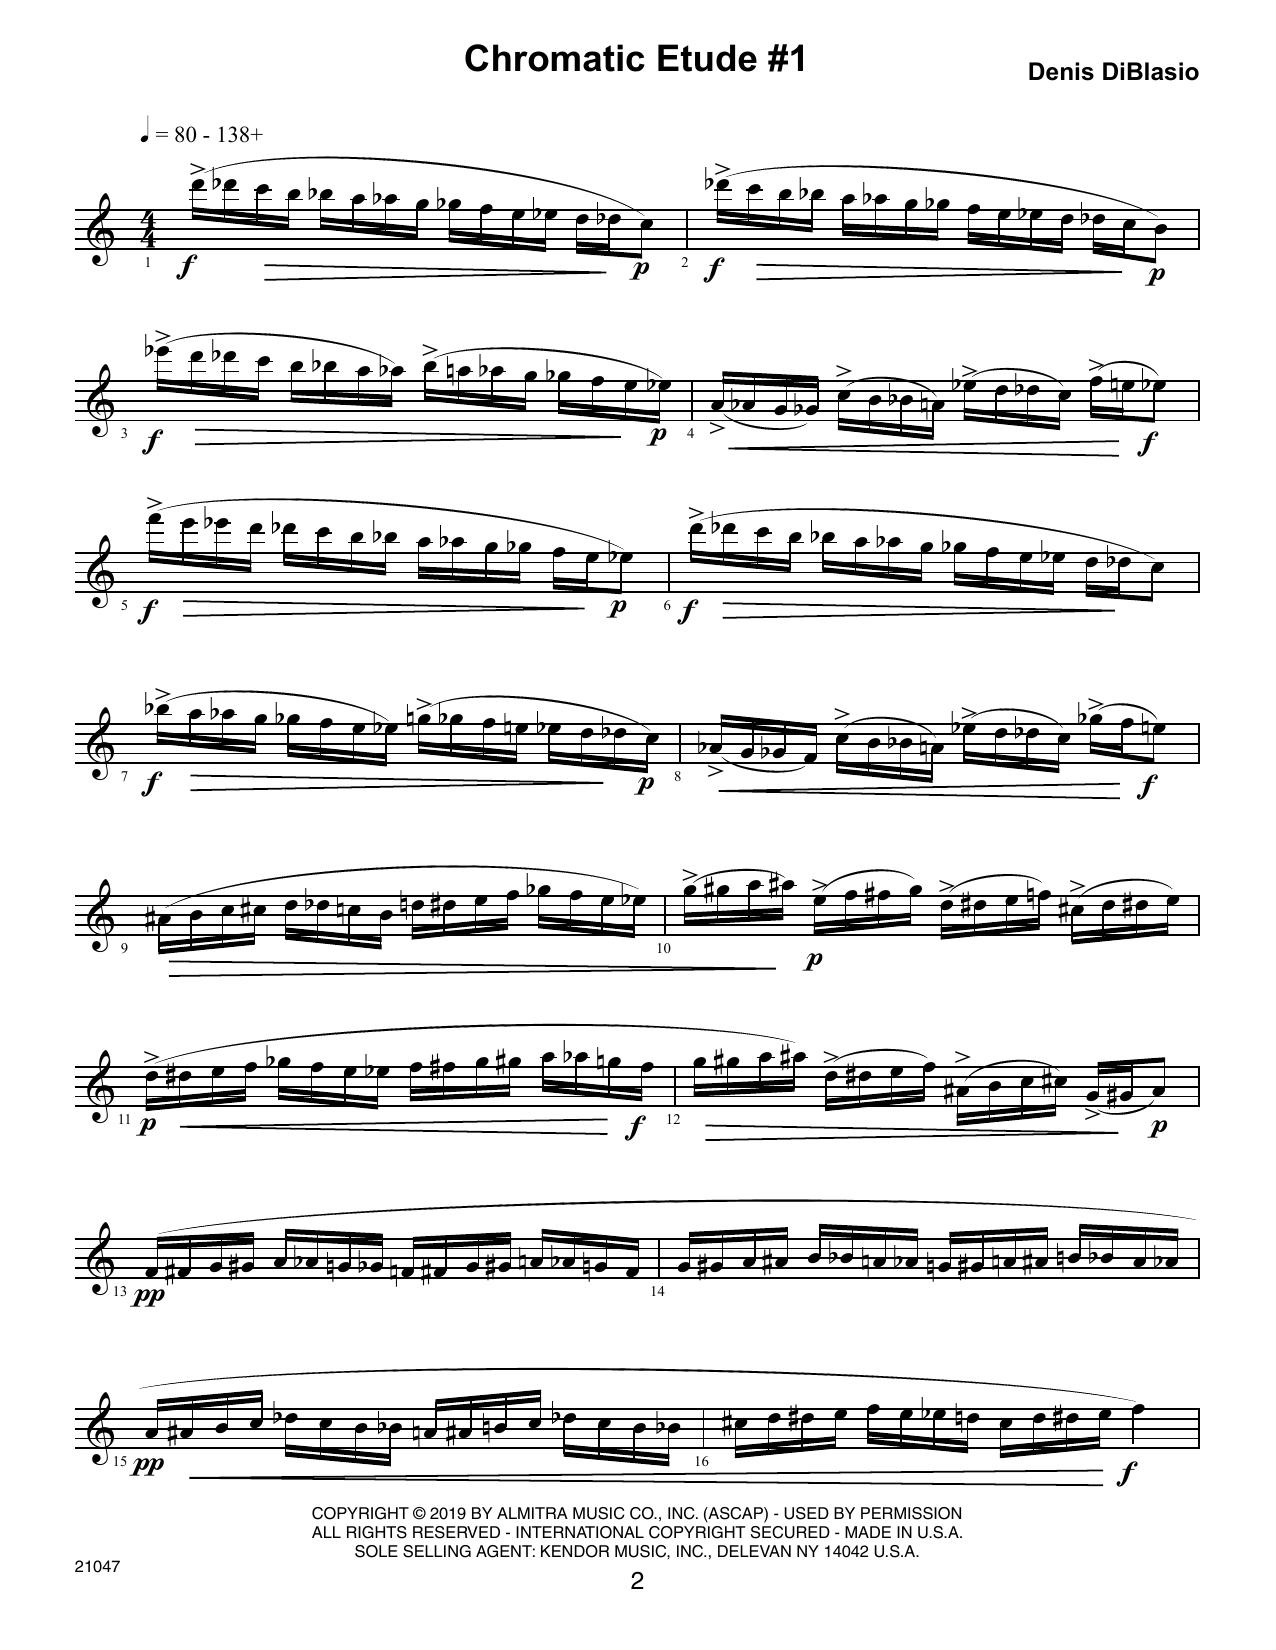 Download Denis DiBlasio Chromatic Etudes And Sound Patterns For Sheet Music